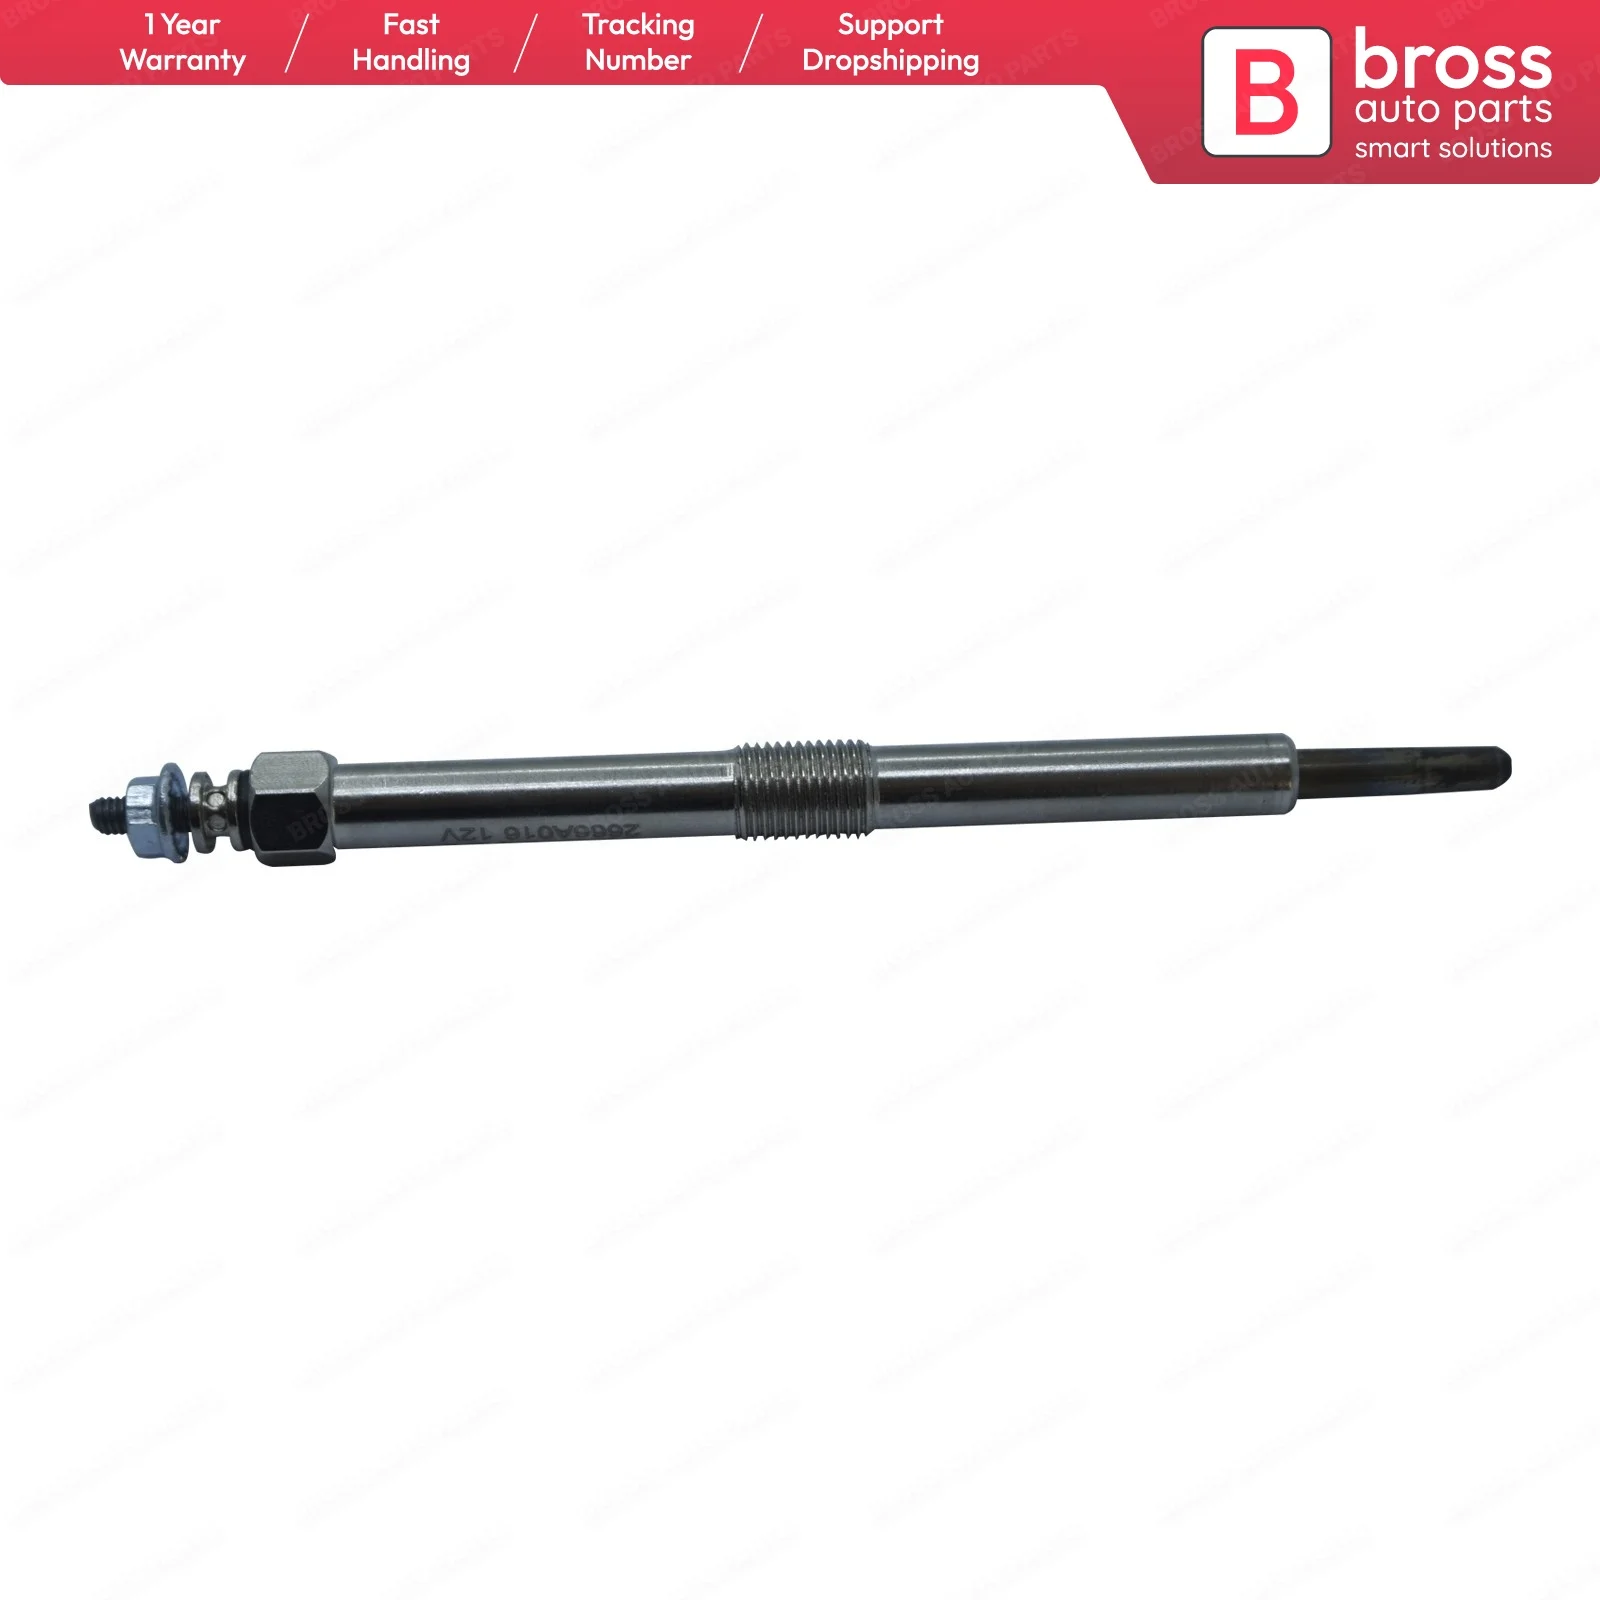 

Bross BGP69 1 Piece Heater Glow Plug 12 Volt for Perkins 2666A016 1103 1104 1106 Made in Turkey, Fast Shipment, Top Store